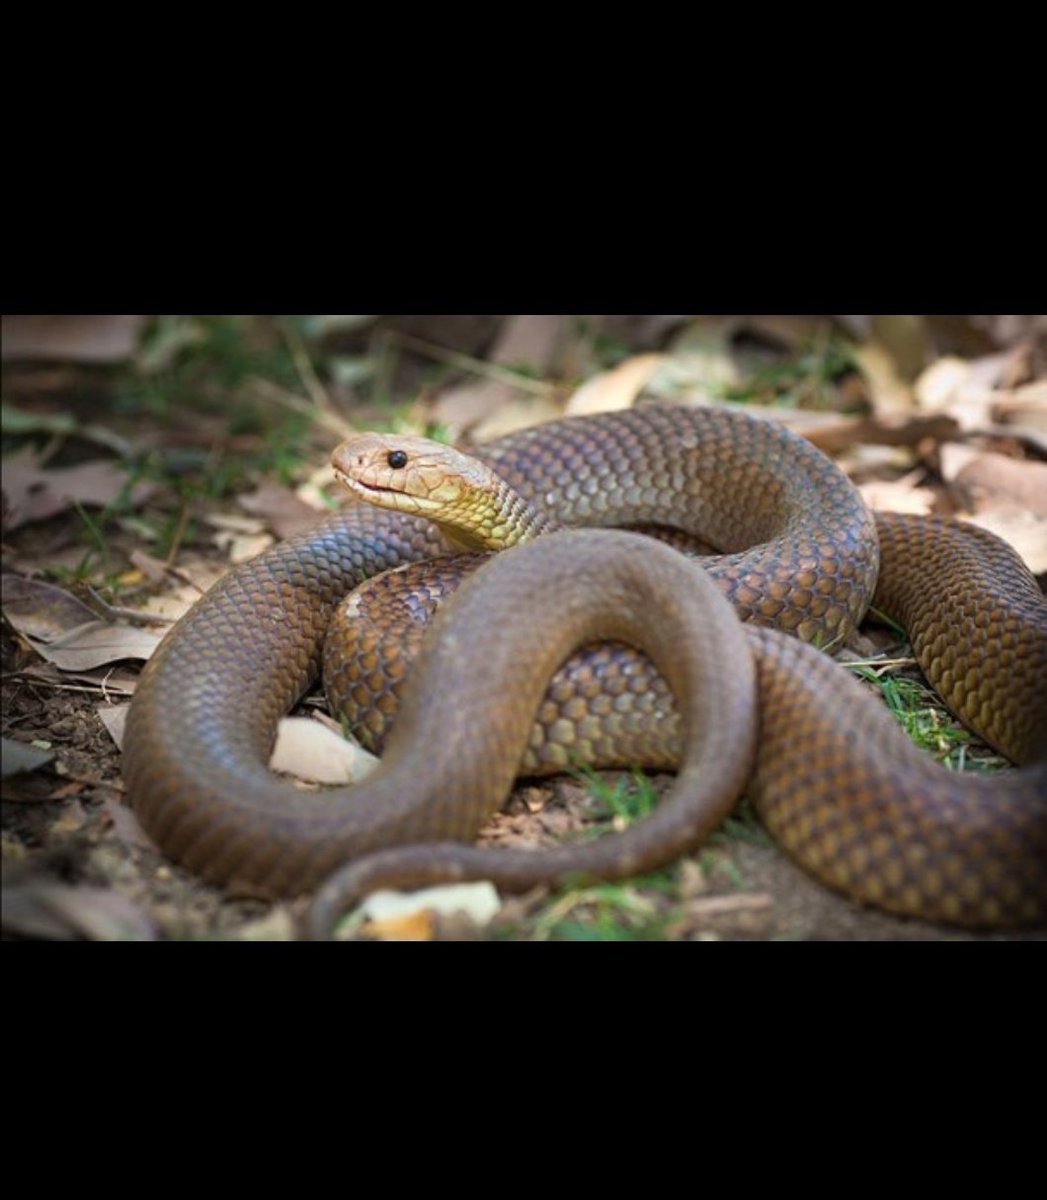 13. AussssstraliaThe Australian Brown Snake’s venom is so powerful that a 14,000th of an ounce can kill a human.